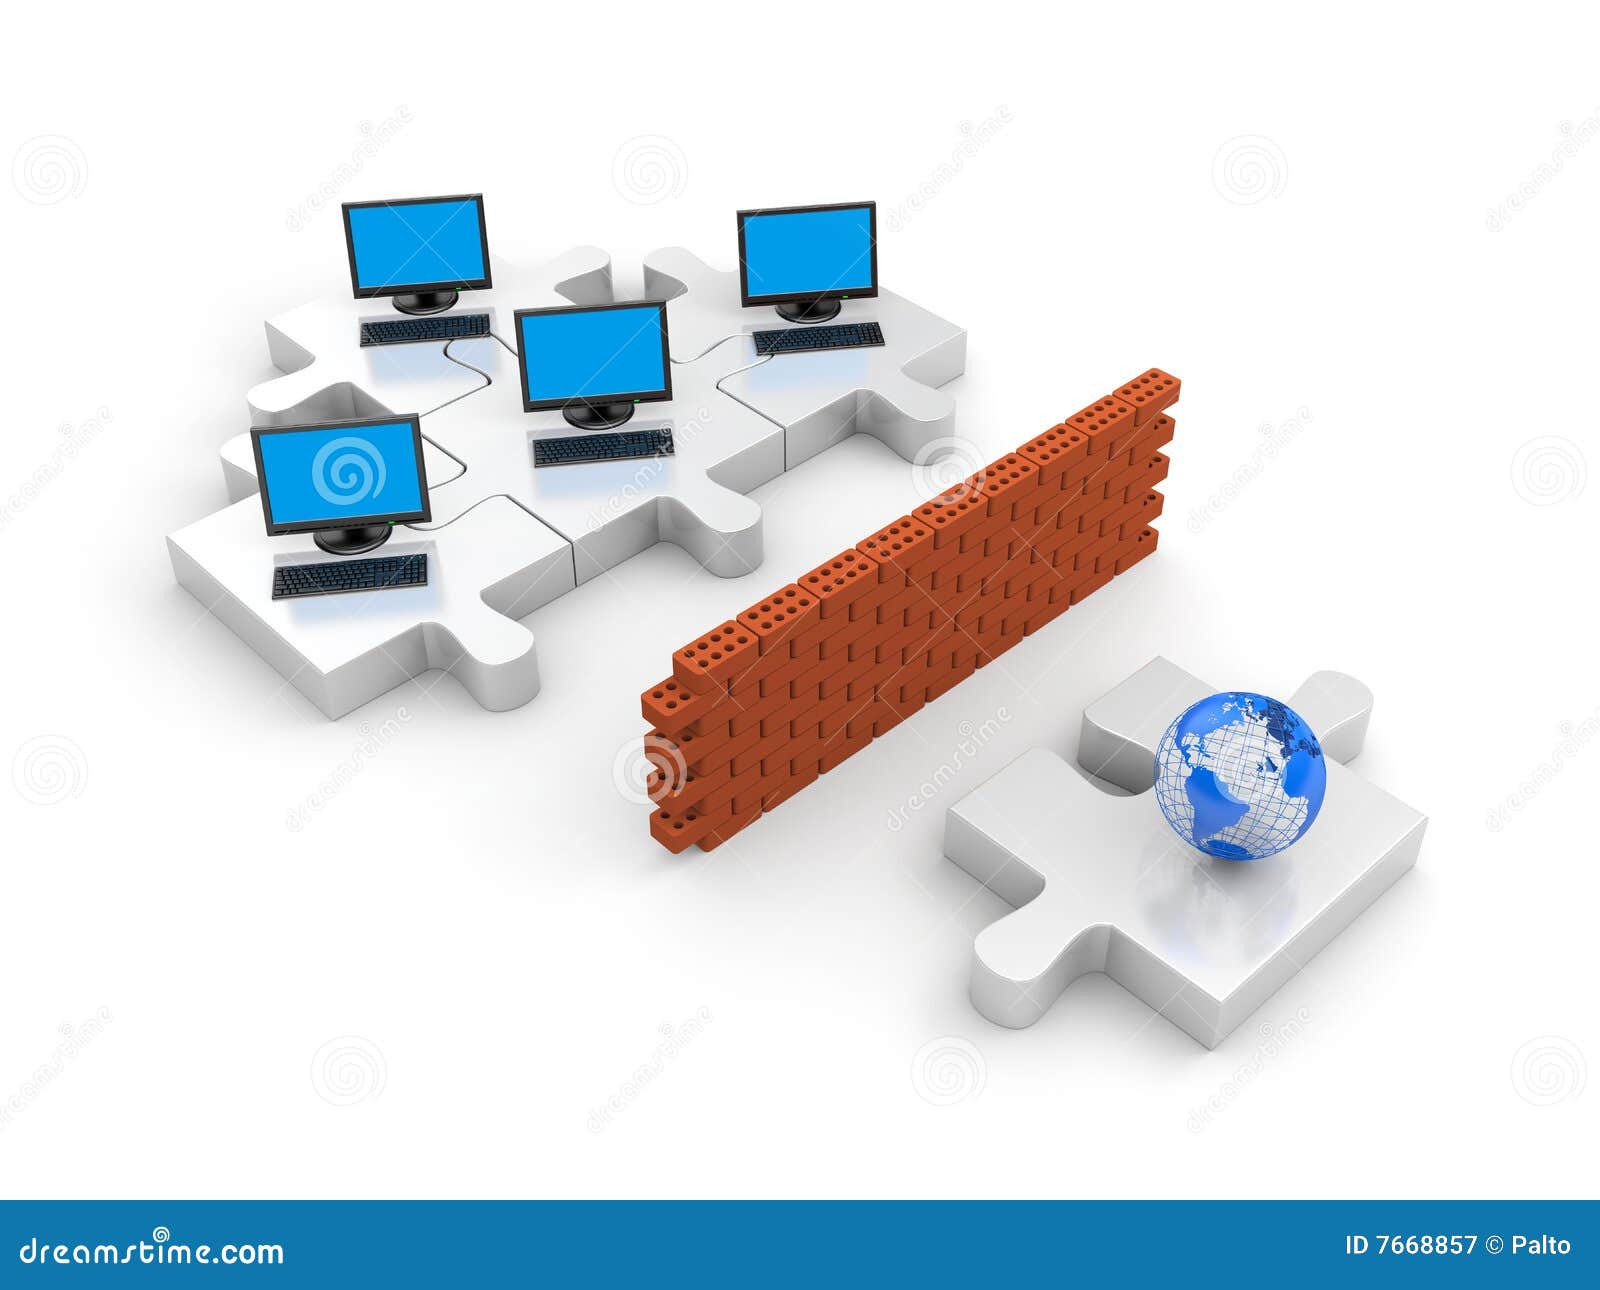 free clipart information security - photo #14